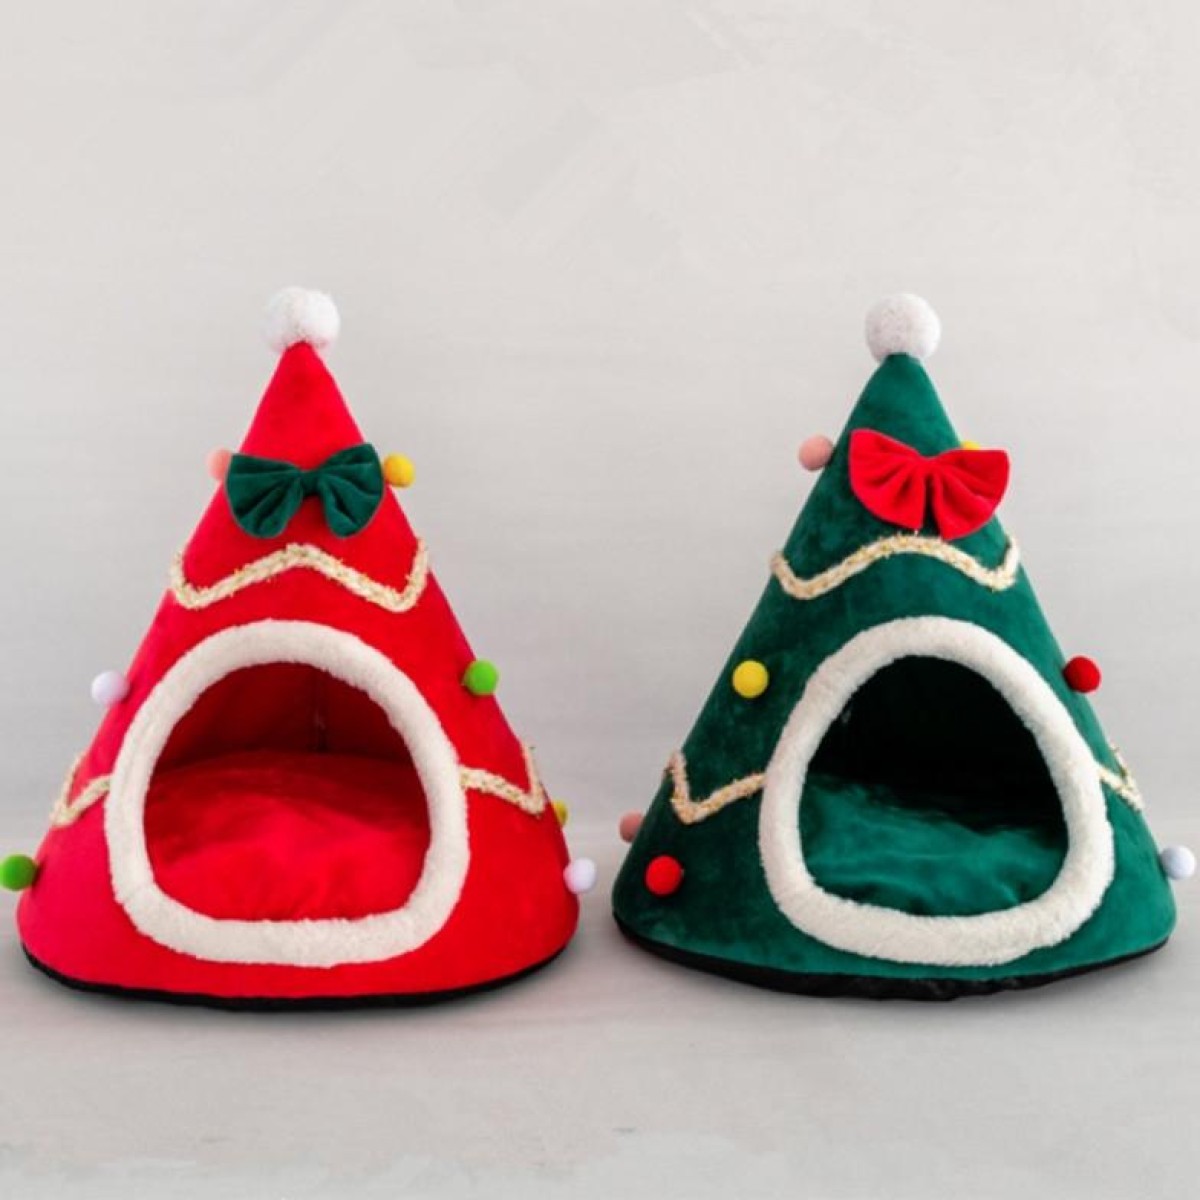 Three-dimensional Sponge Christmas Hat Shaped Pet Bed Nest Warmth Supplies, Size:Medium 45x55cm(Red)